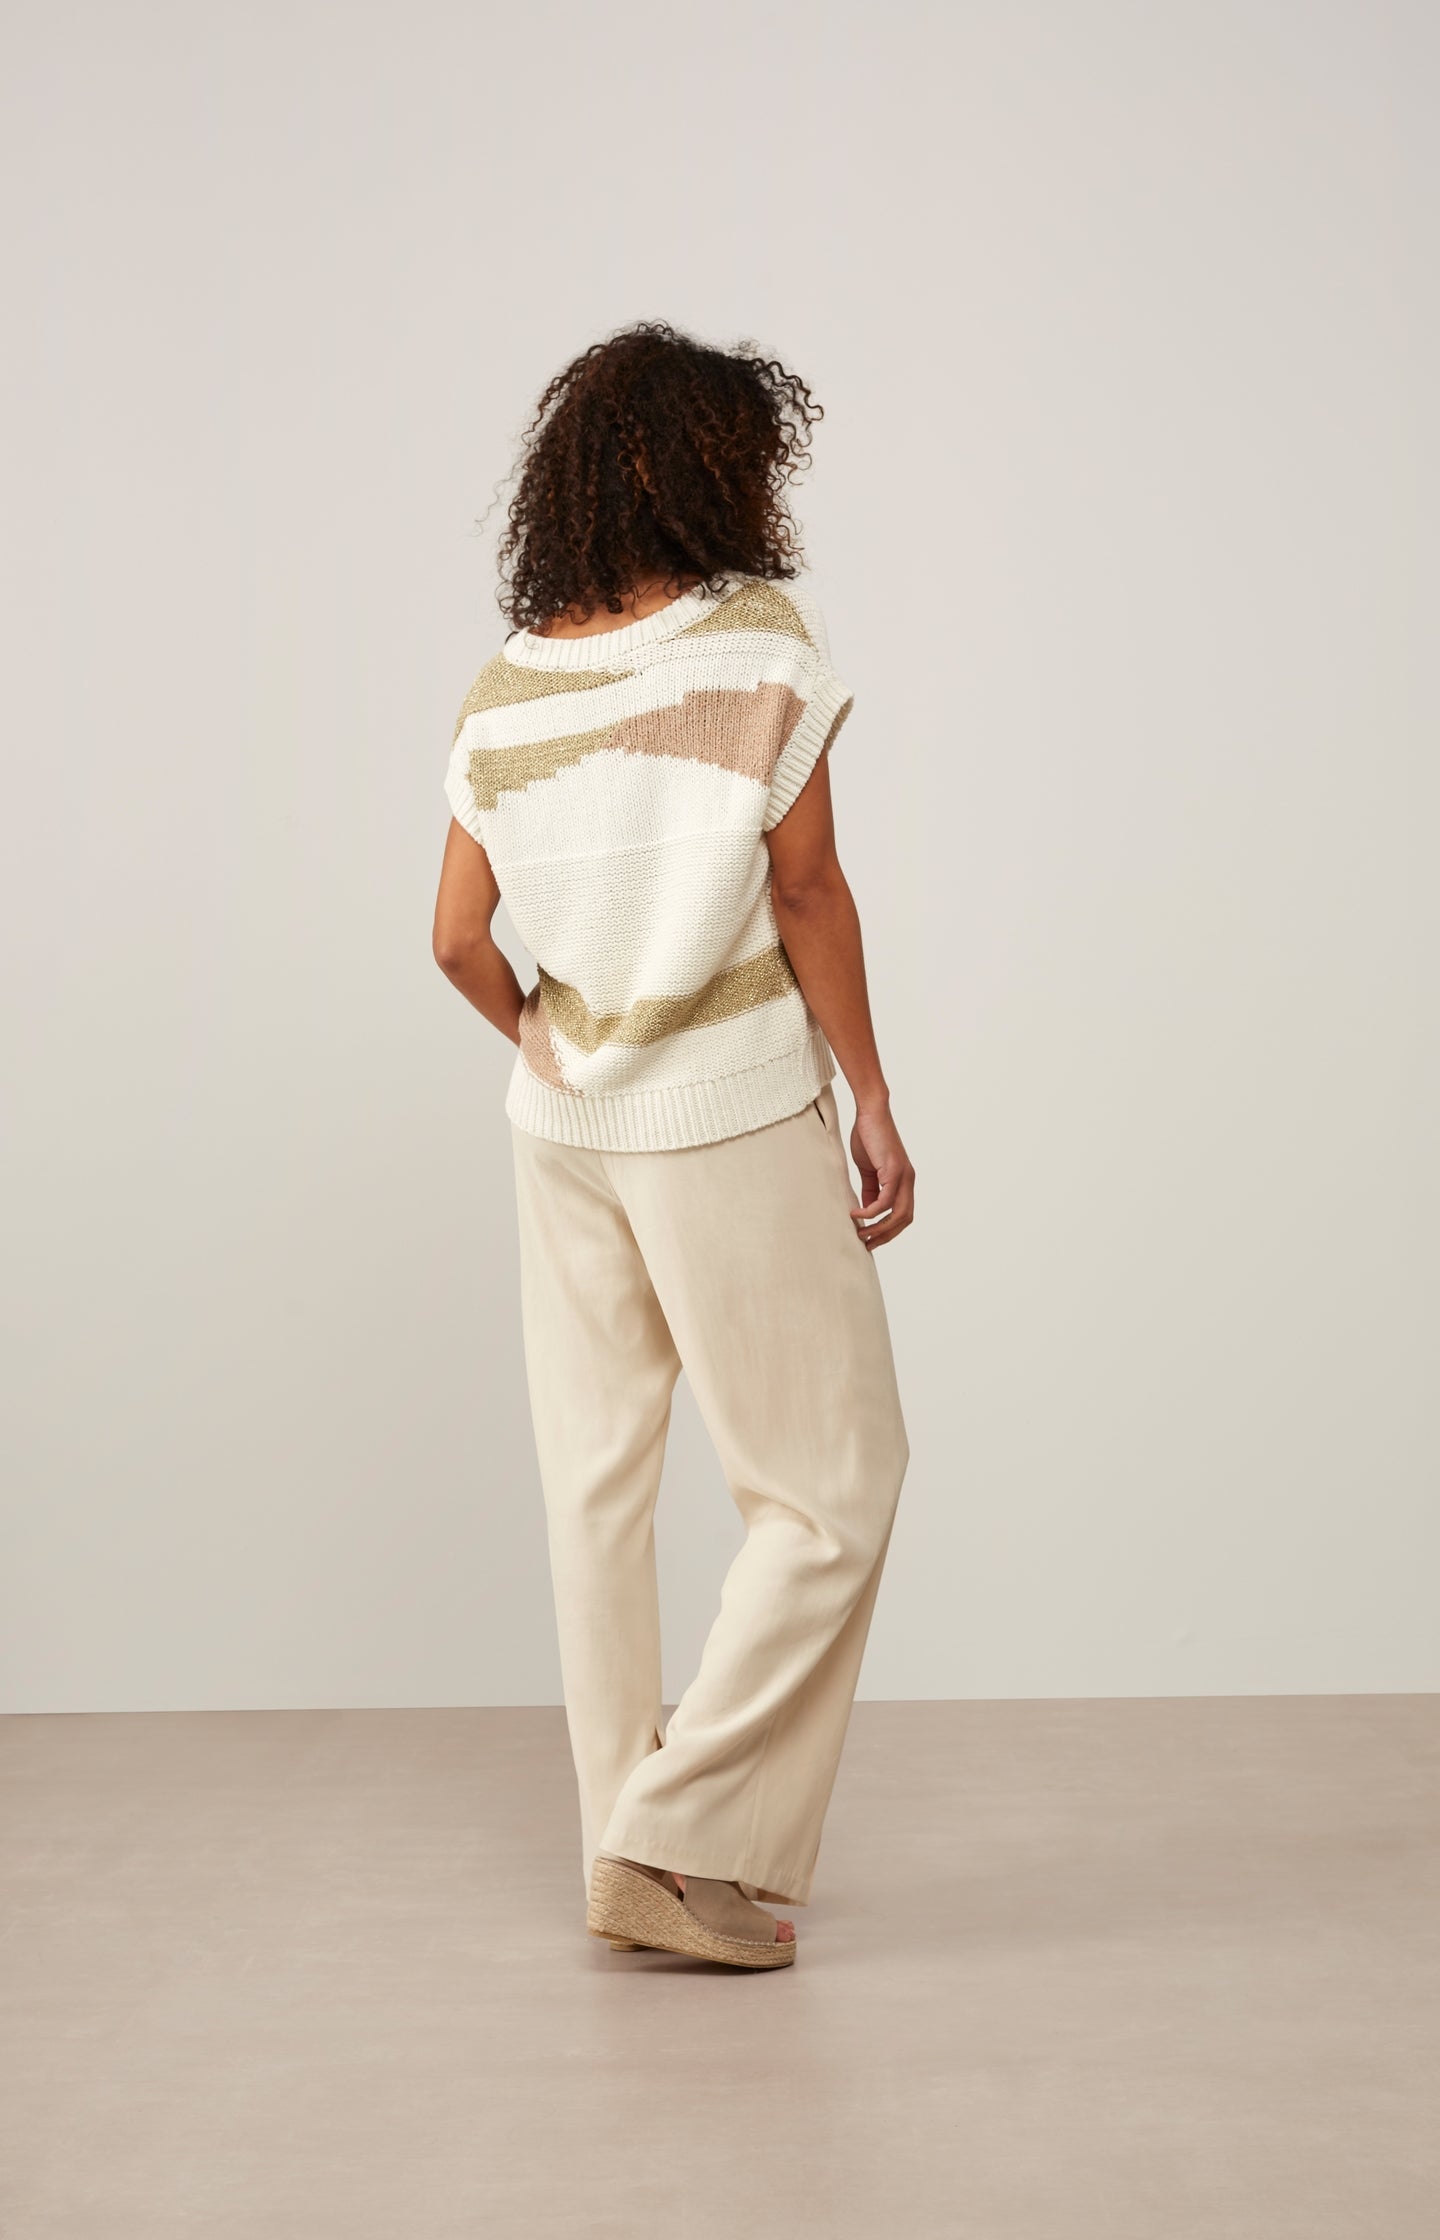 Wide leg trousers, side pockets, pintucks and a slit